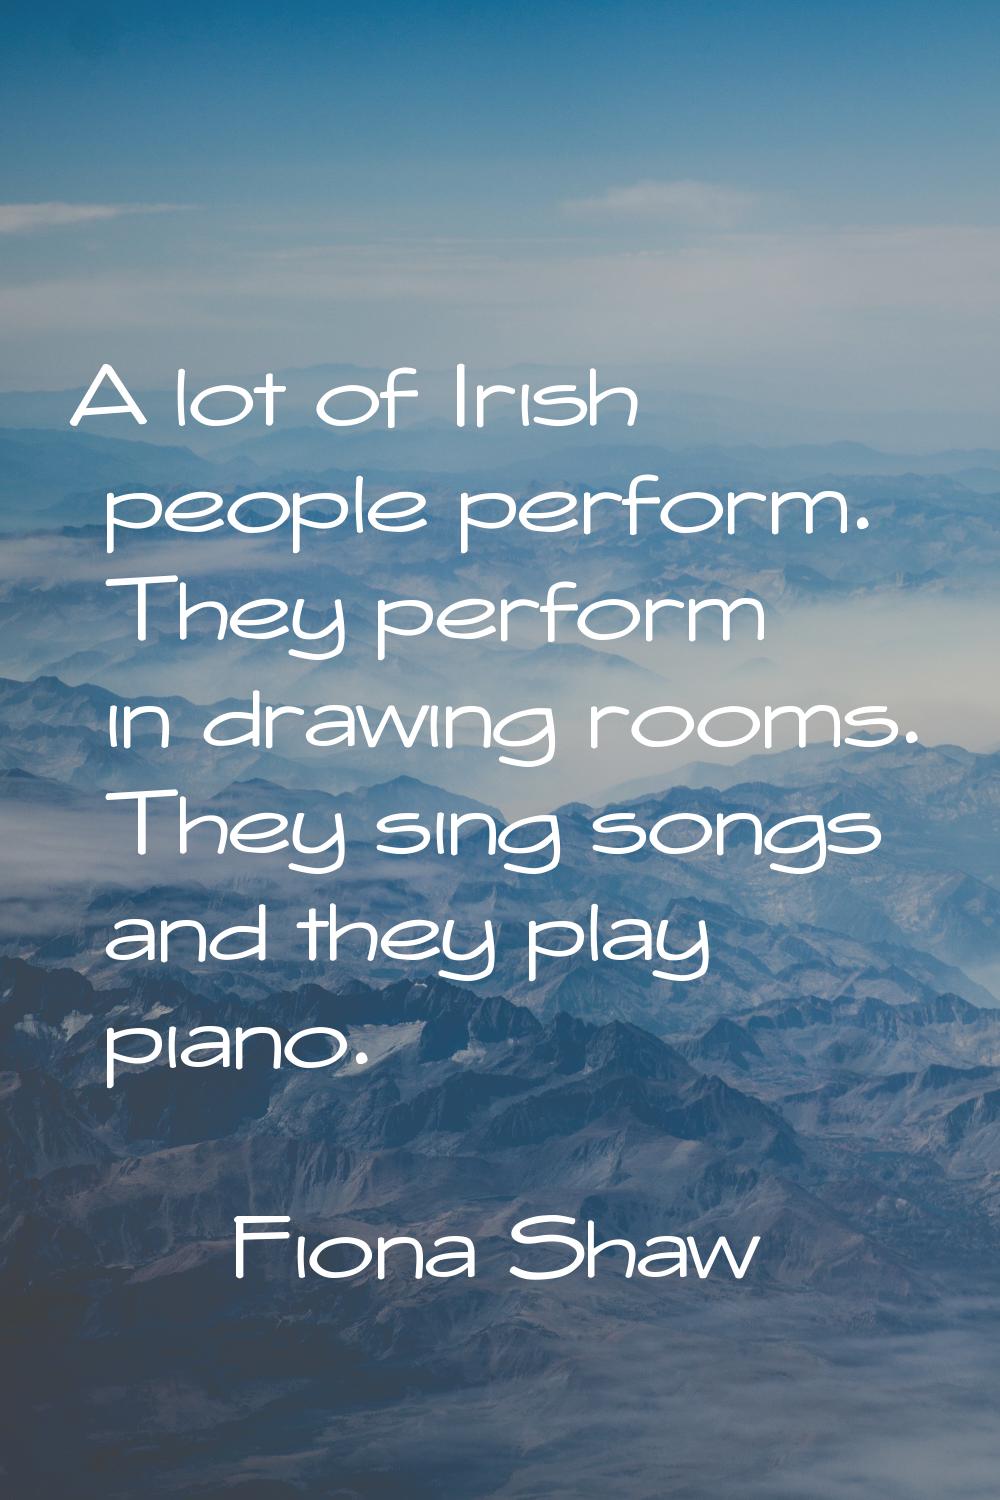 A lot of Irish people perform. They perform in drawing rooms. They sing songs and they play piano.